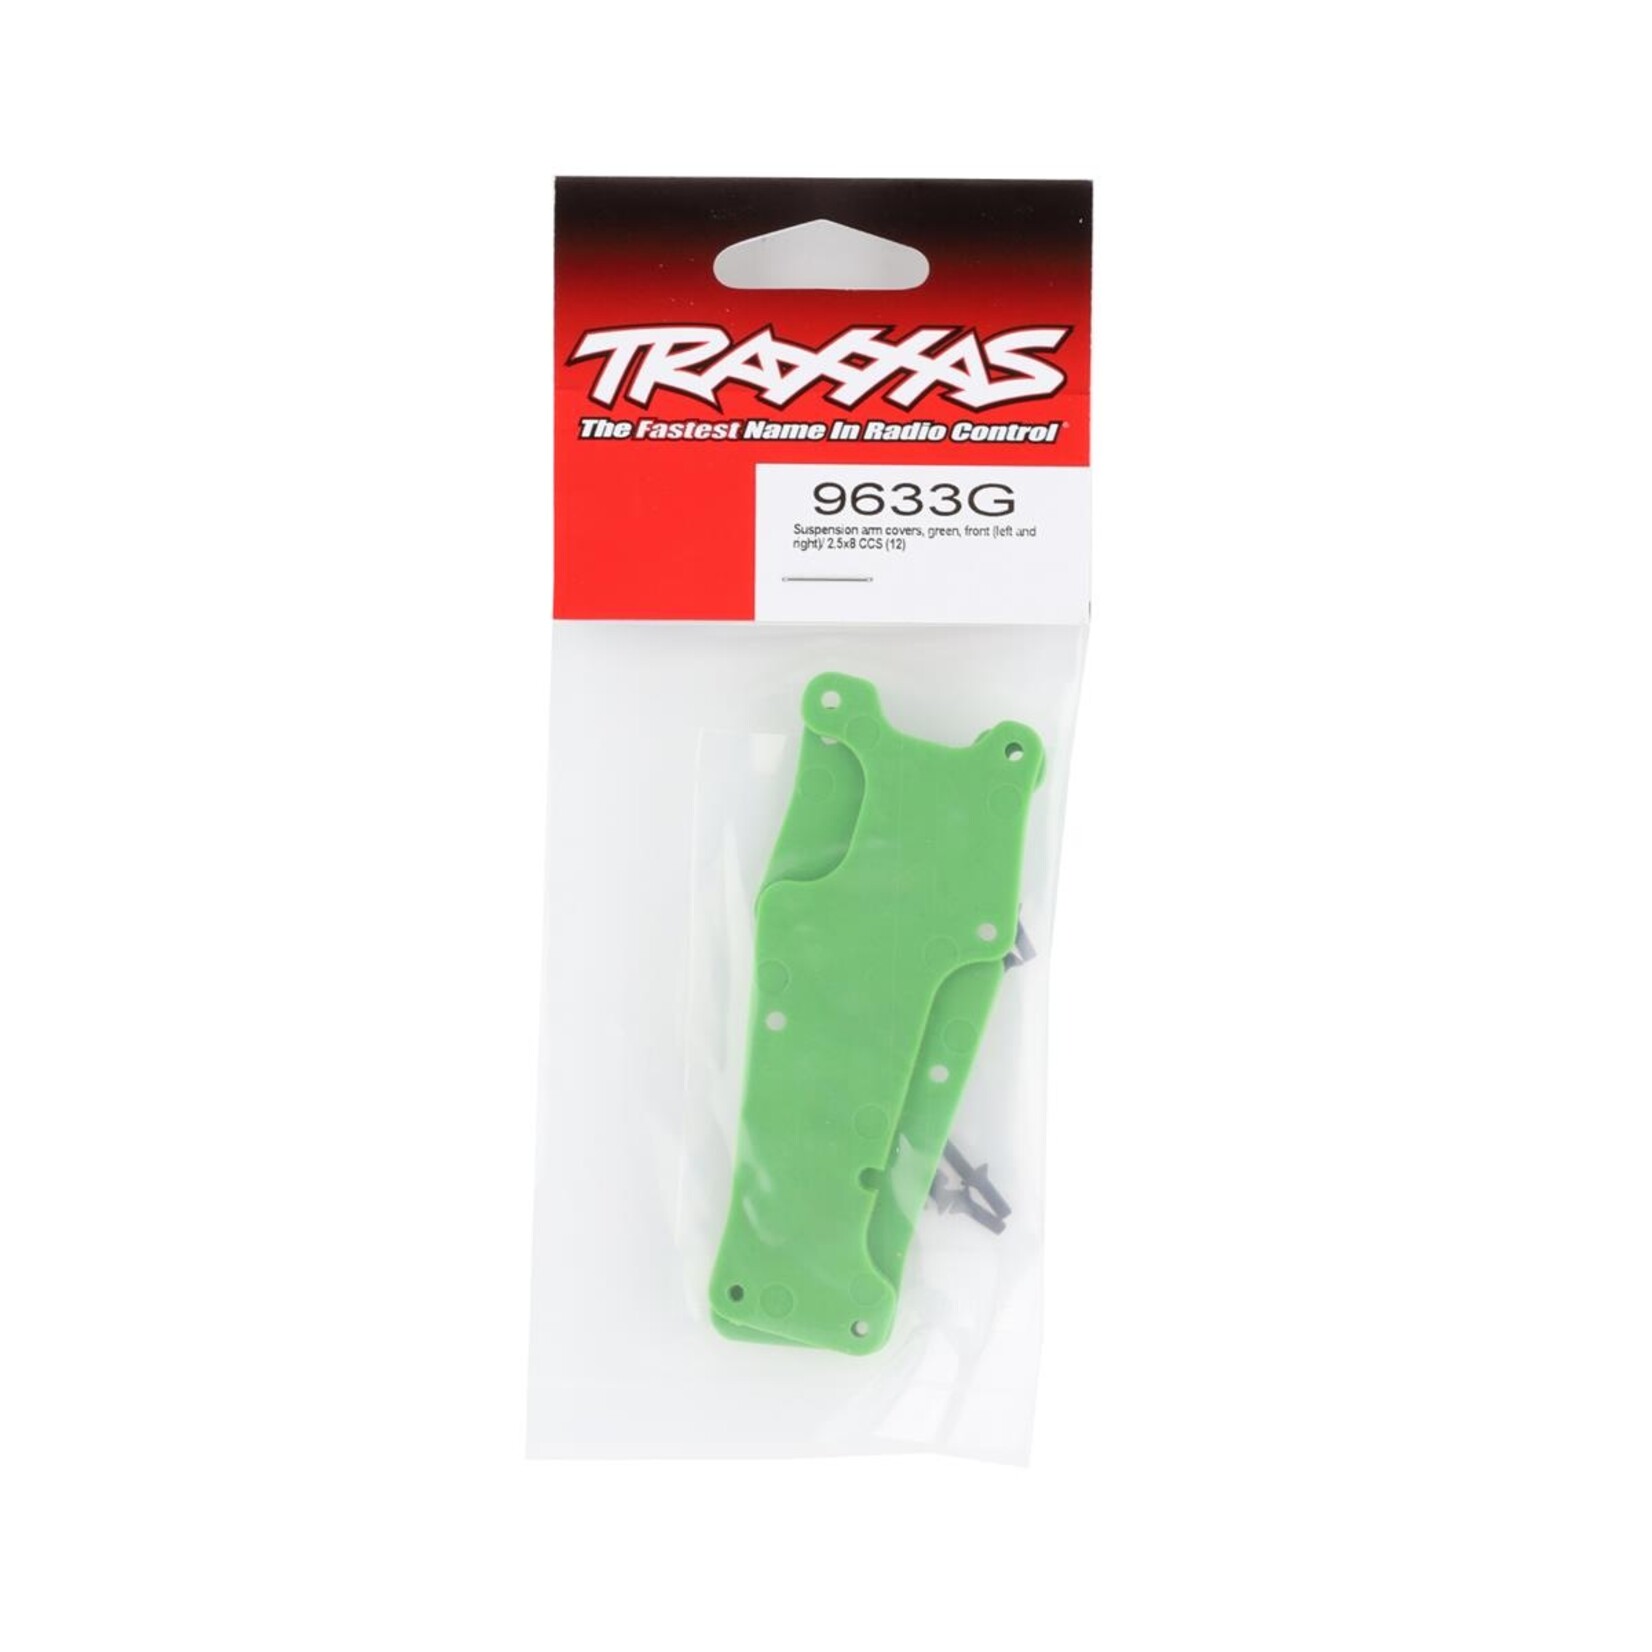 Traxxas Traxxas Sledge Front Suspension Arm Covers (Green) (2) #9633G